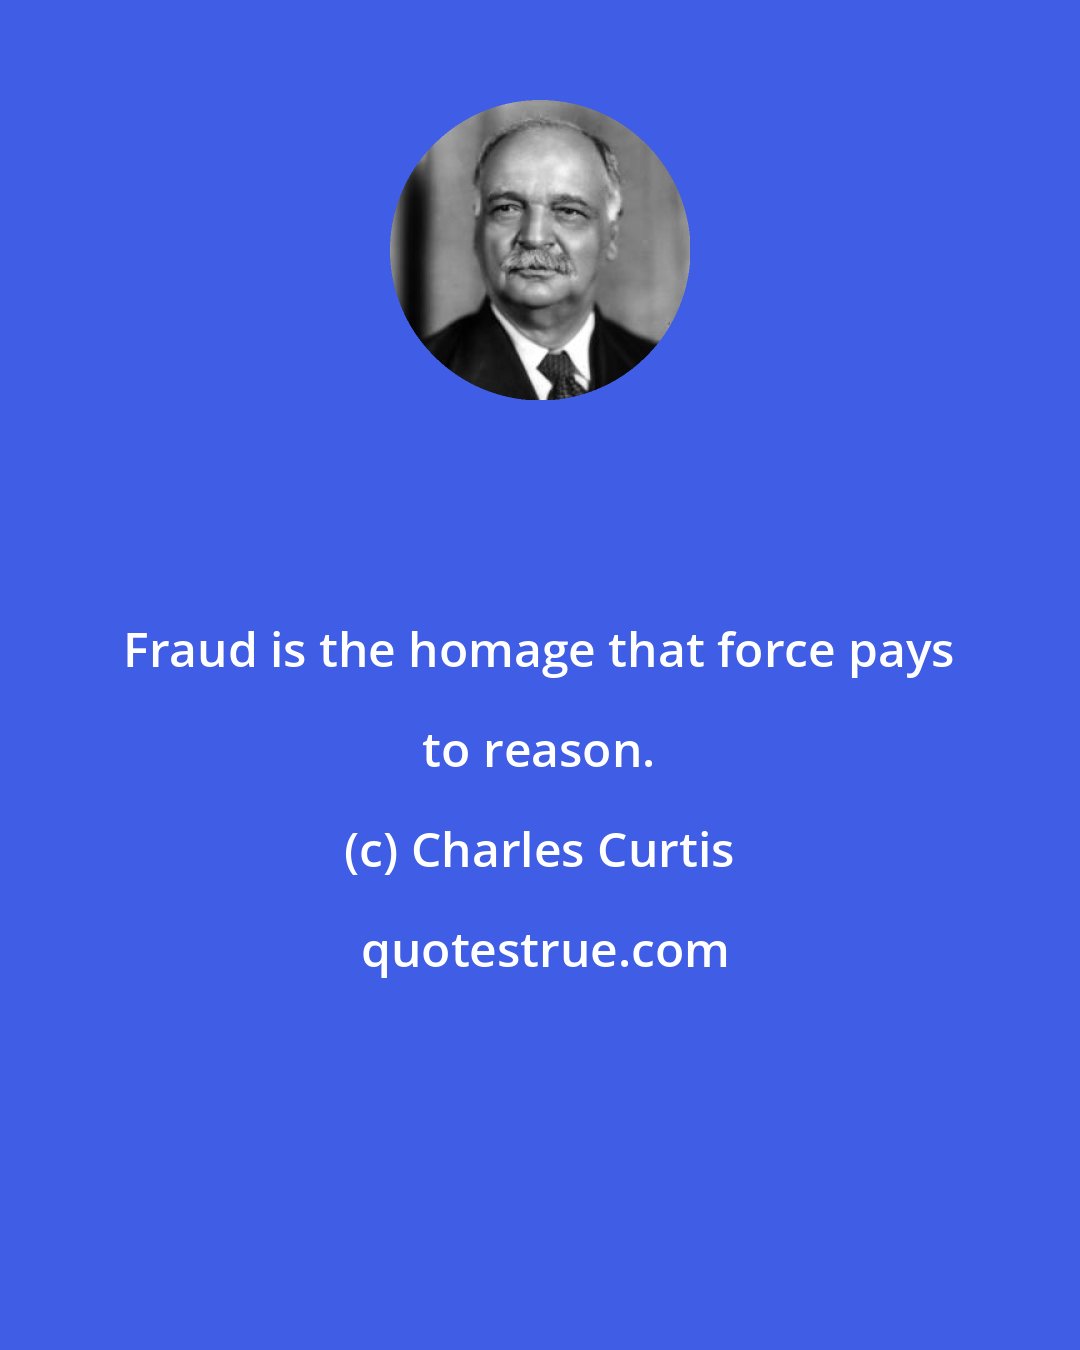 Charles Curtis: Fraud is the homage that force pays to reason.